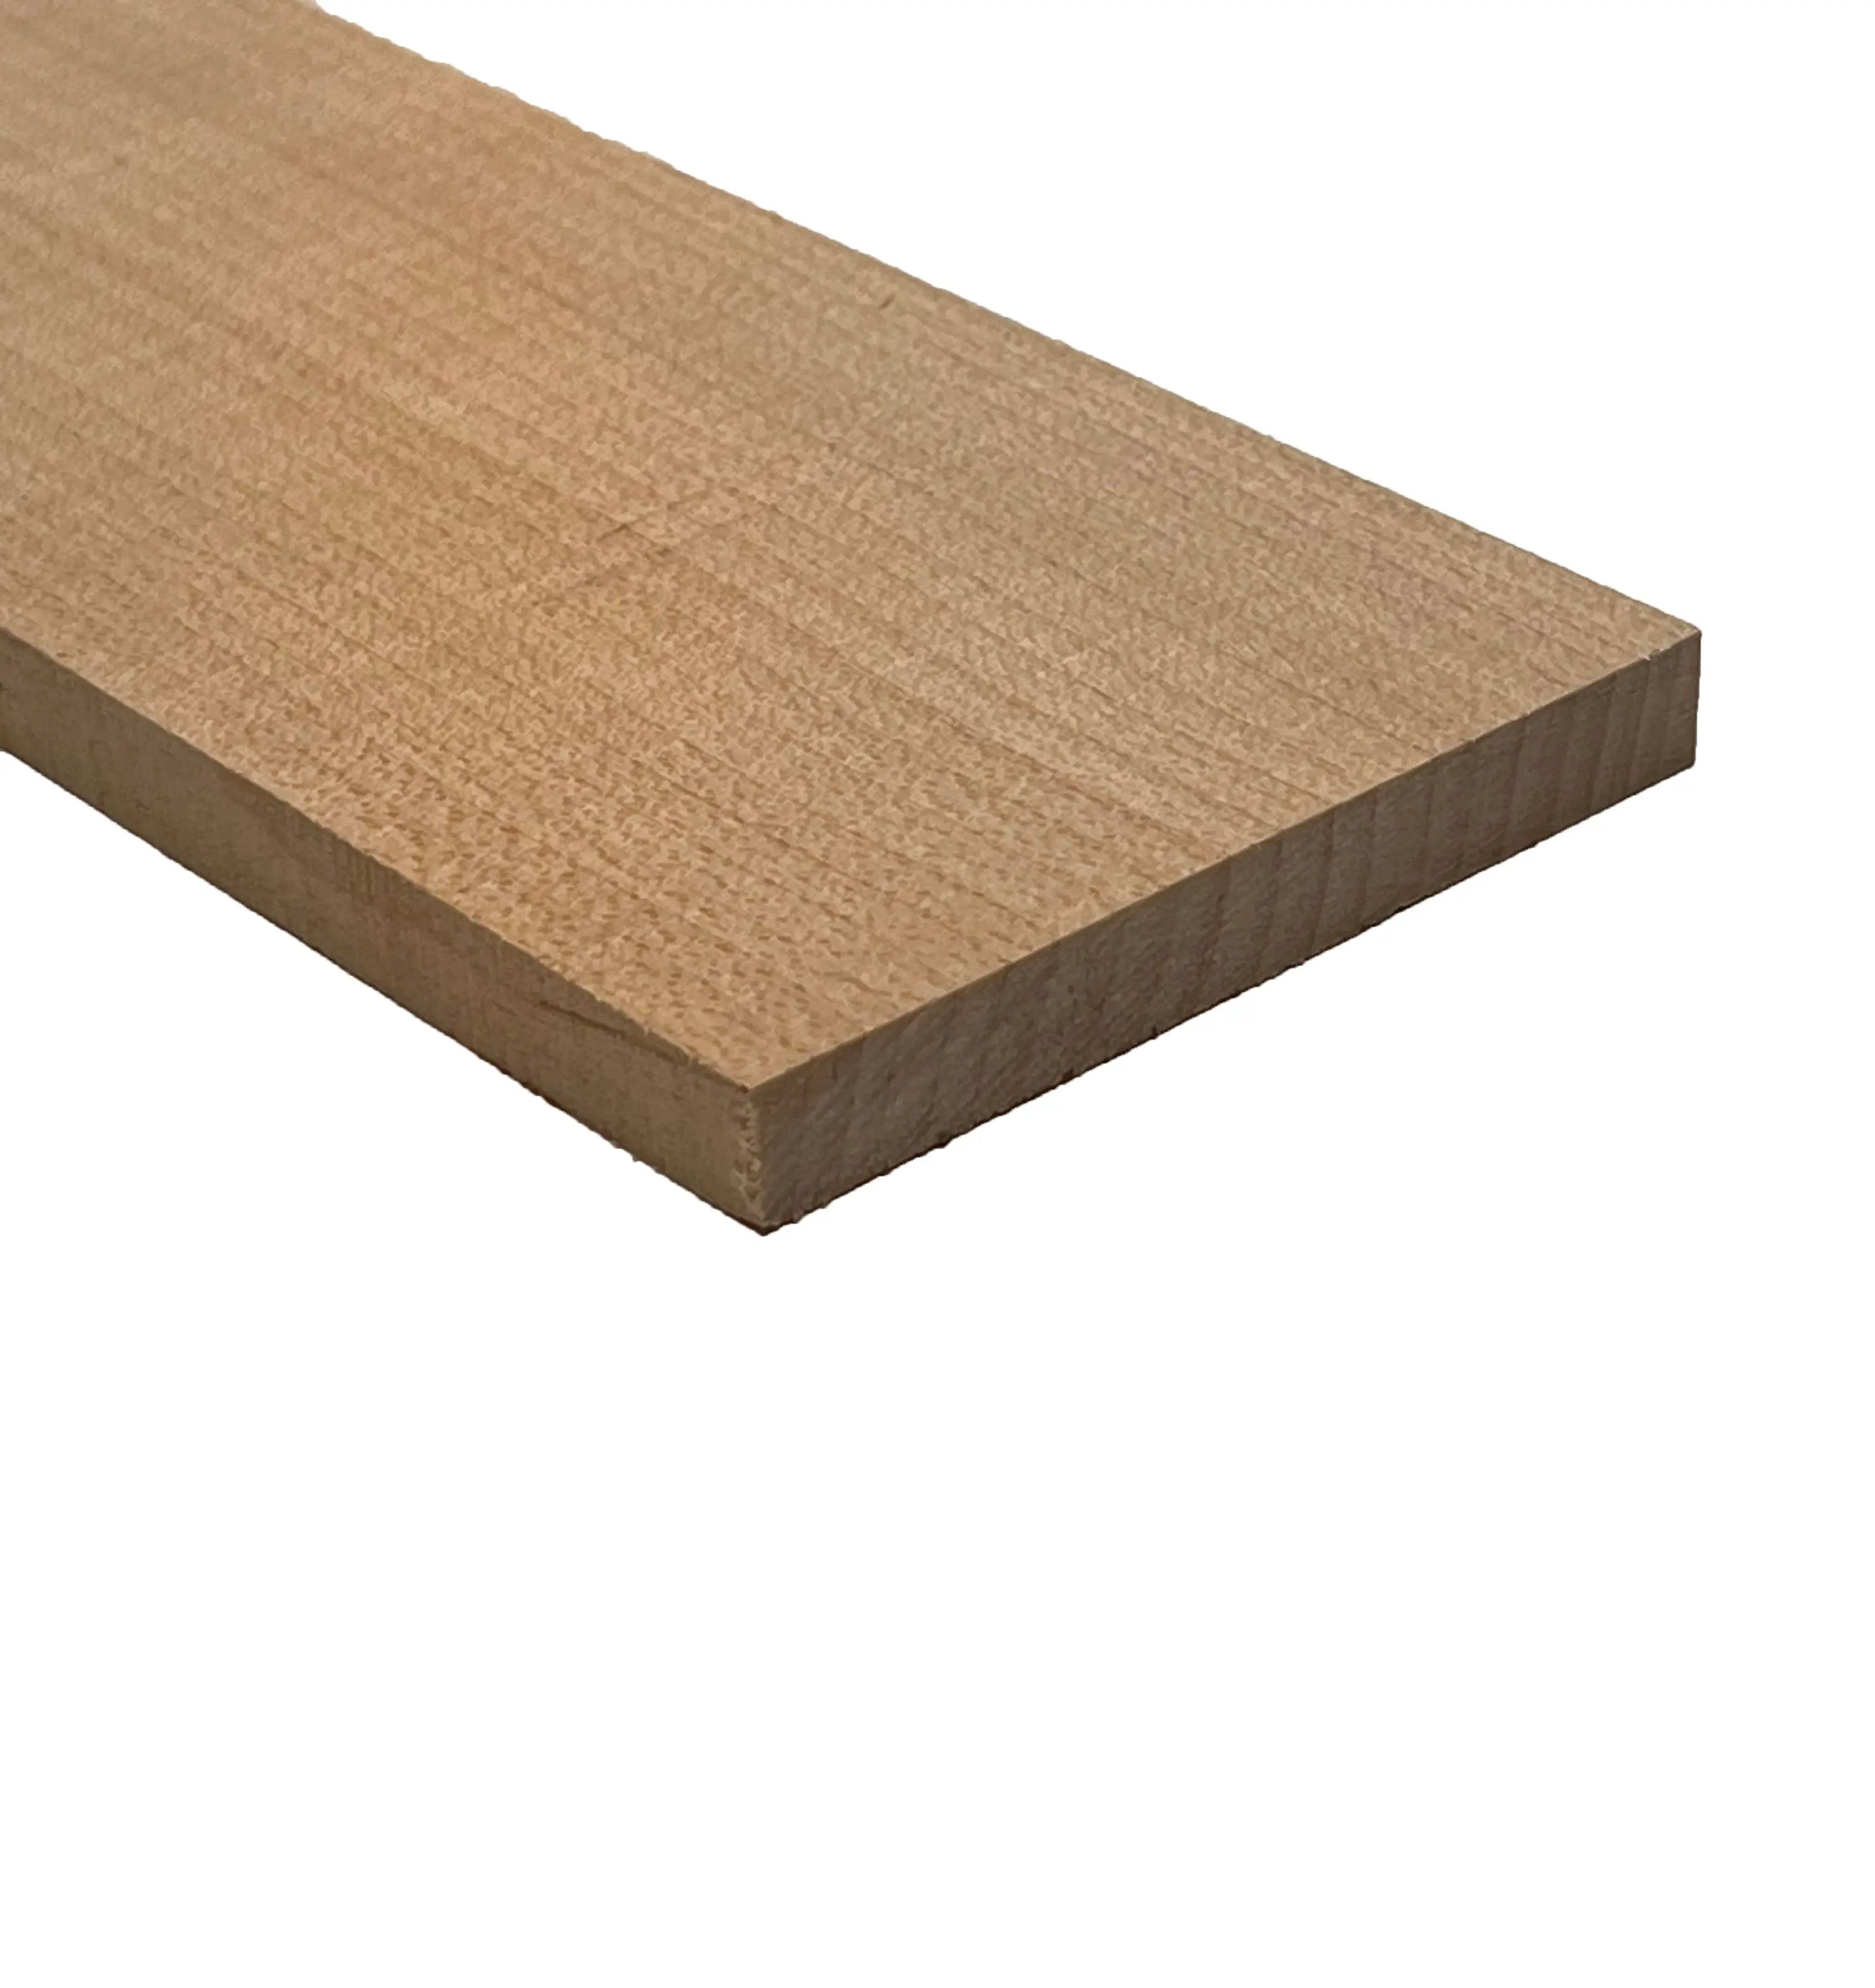 12 Pack Basswood Sheets 12 x 8 x 1/13 Inch Thin Plywood Wood 12 x 8 inch